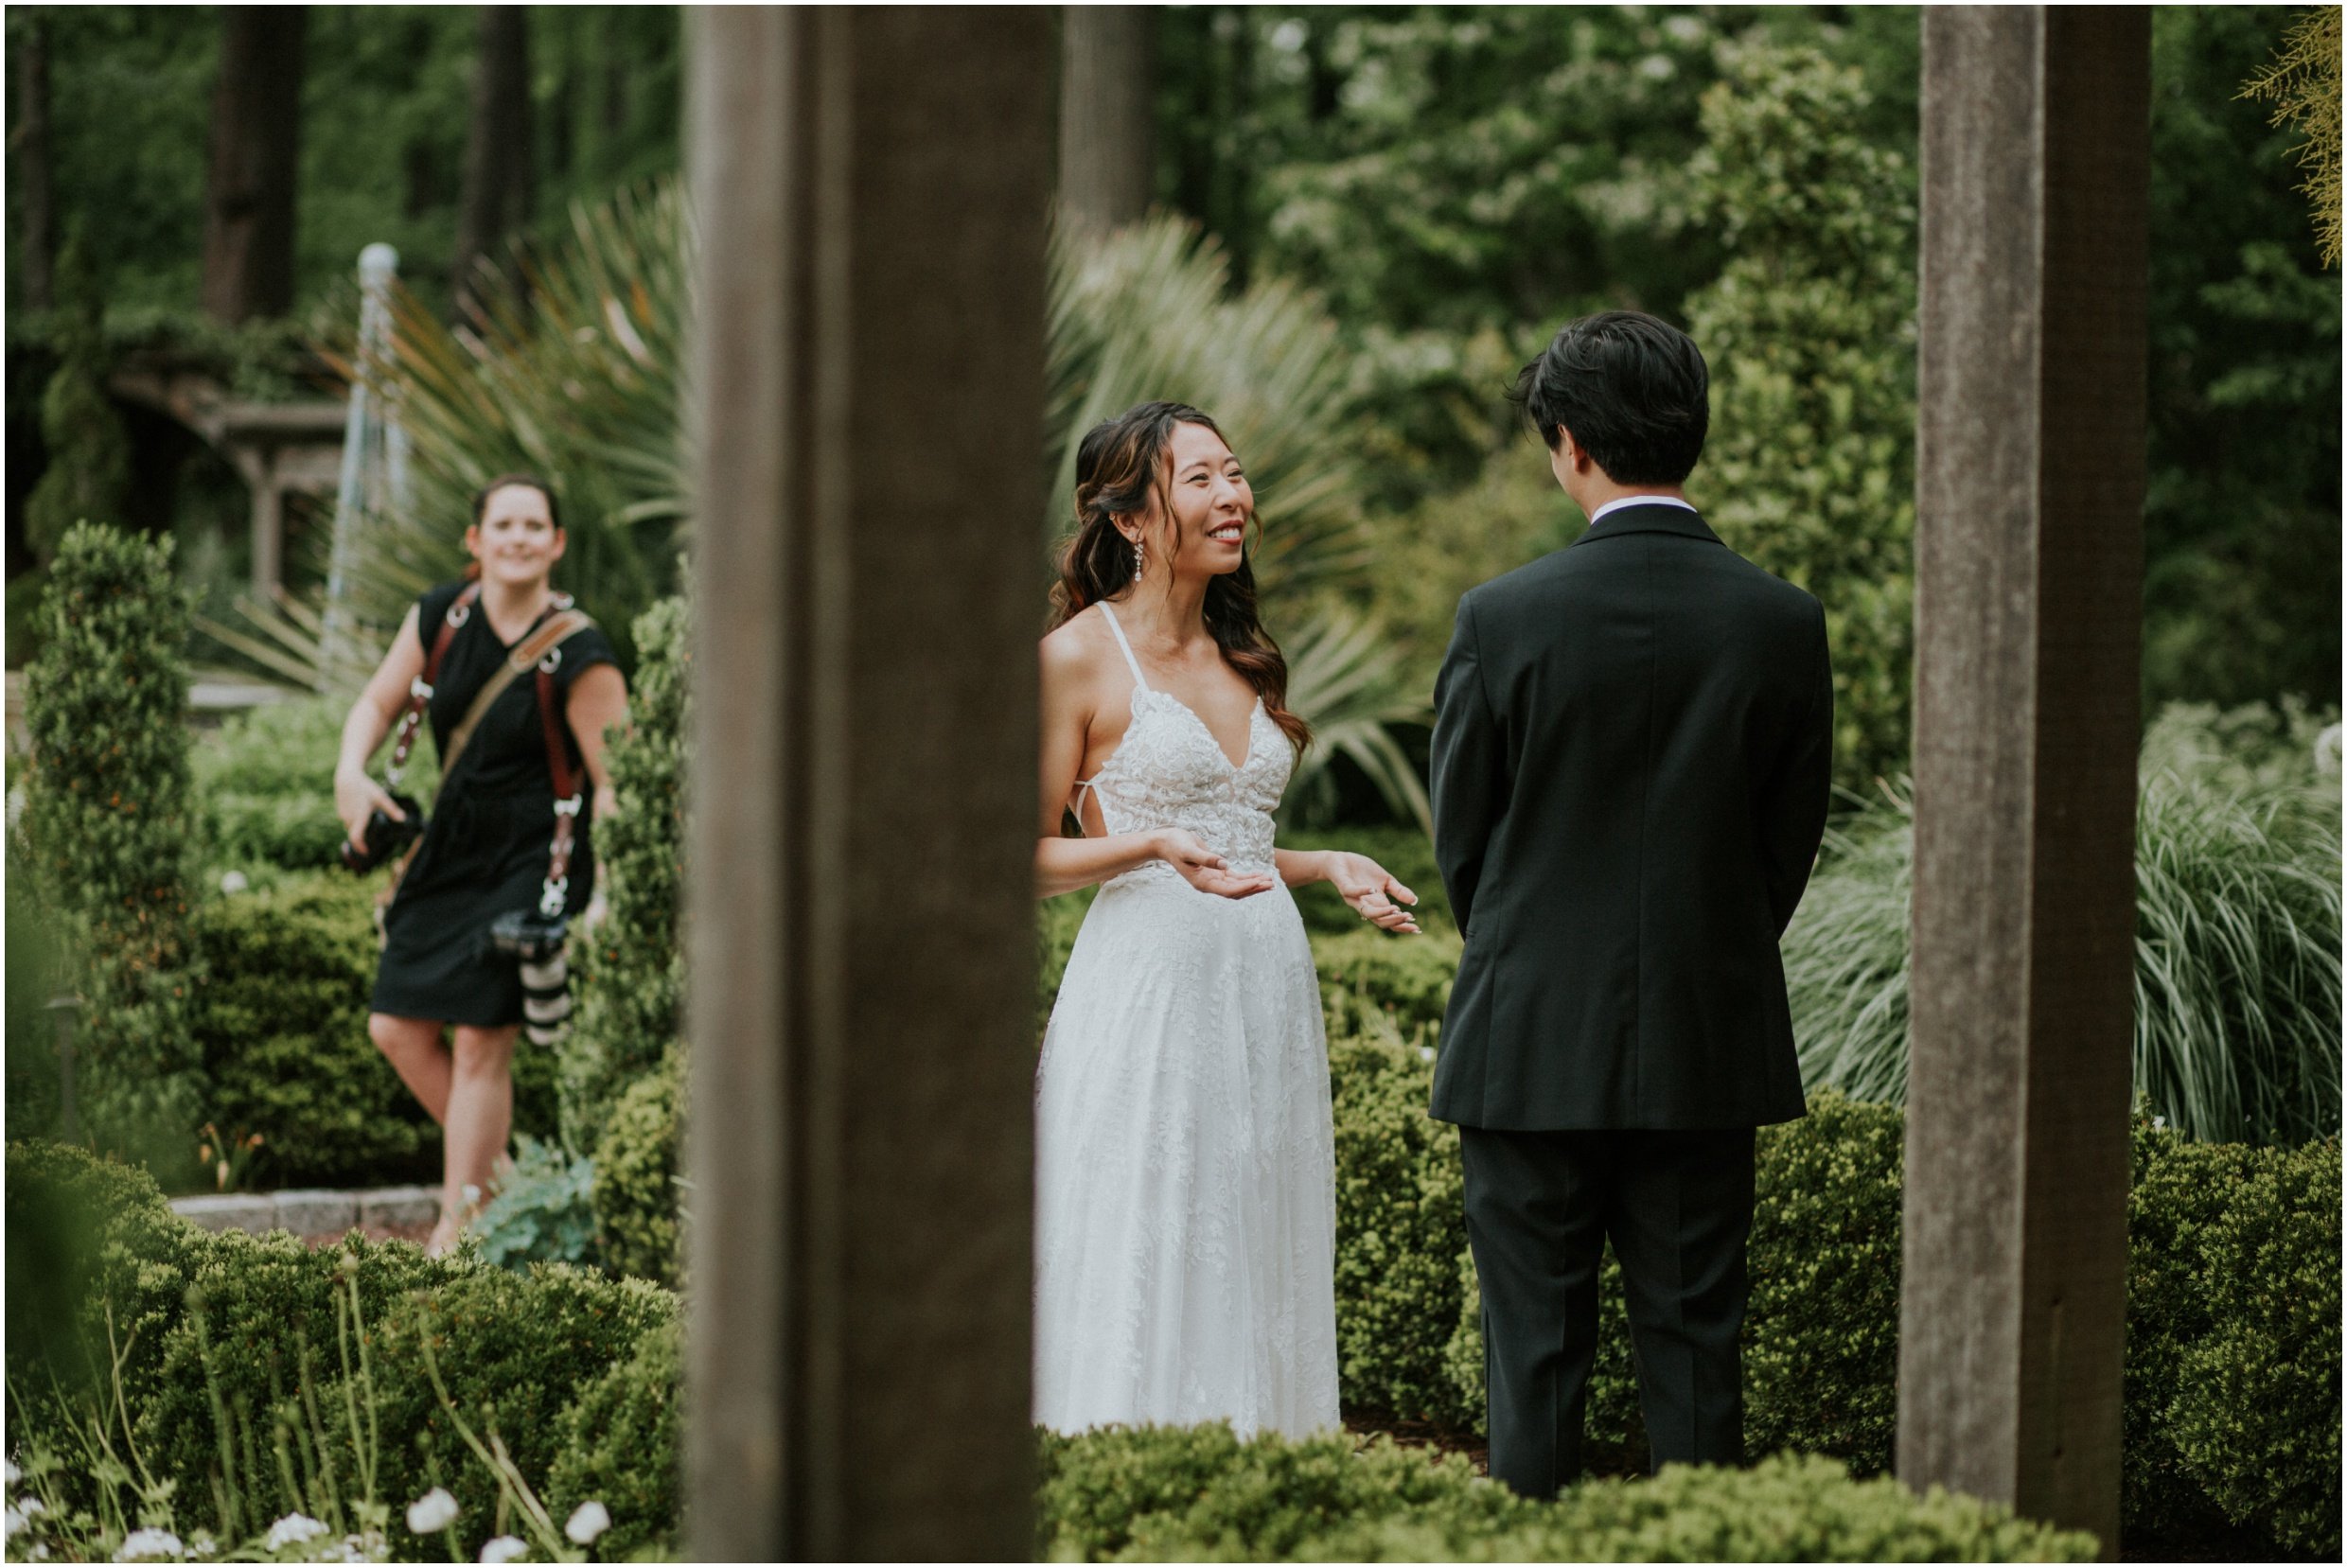 My last wedding in April, I traveled to Durham to photograph Vania and Ngan's wedding at Duke Gardens! It was a dream come true!